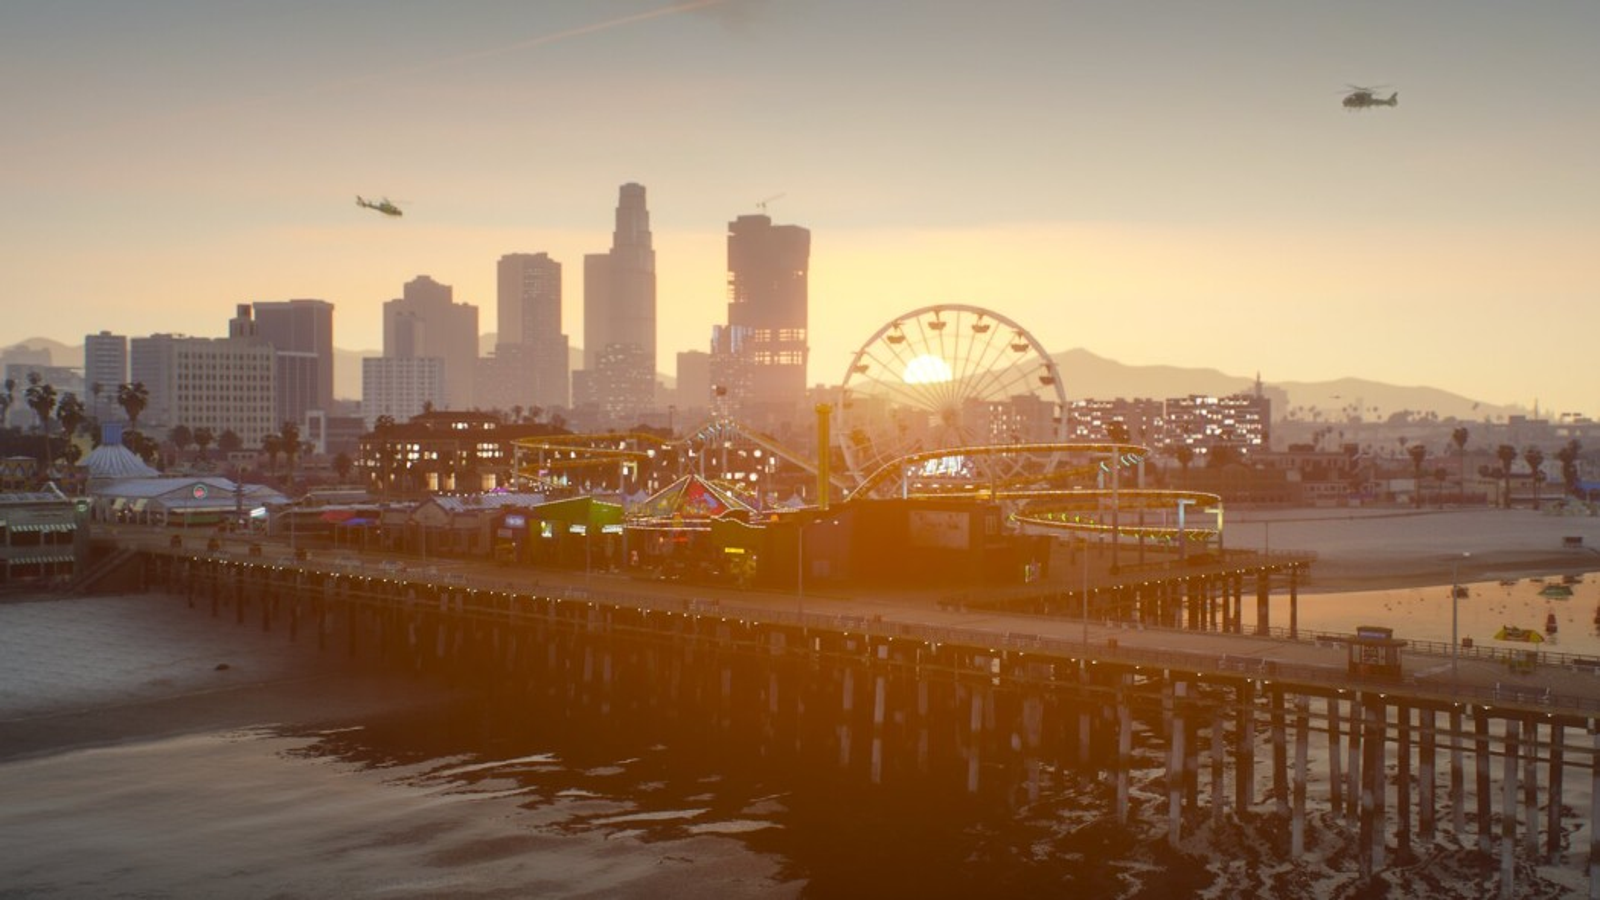 GTA V Receives Major Update With Substantial Performance Improvements -  autoevolution